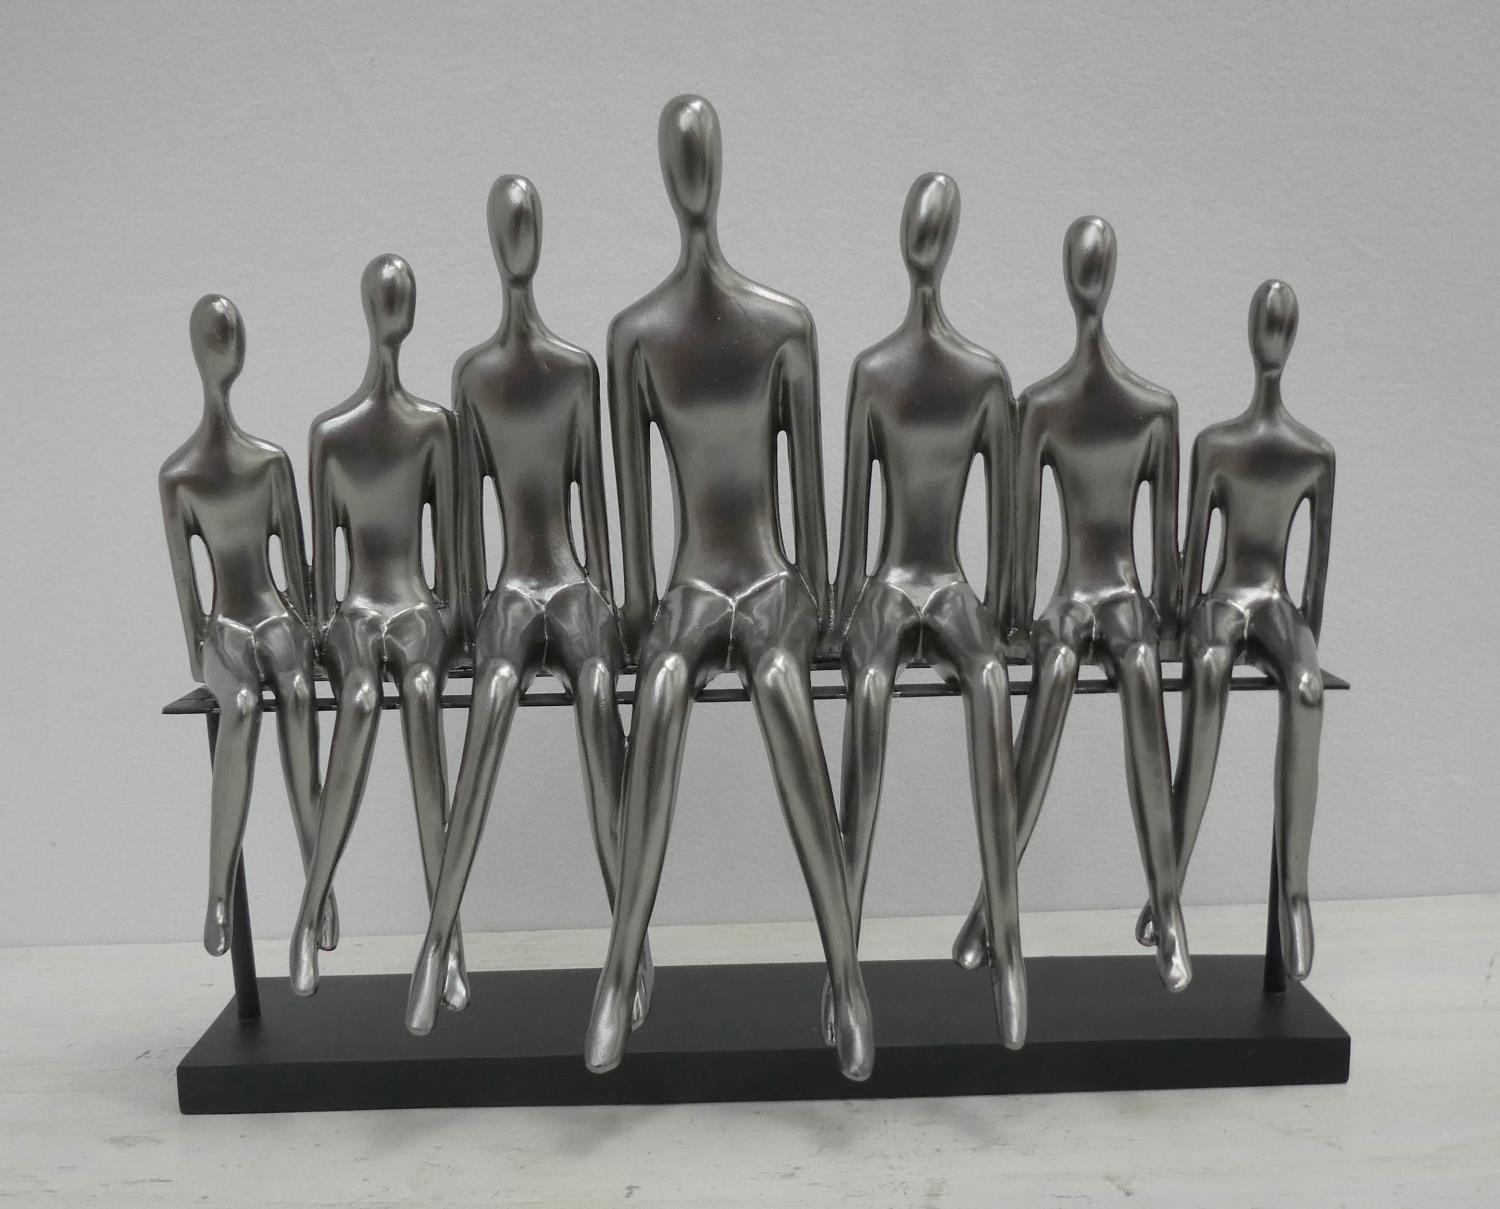 CONTEMPORARY SCHOOL, The Family, sculptural study, 34cm at tallest.